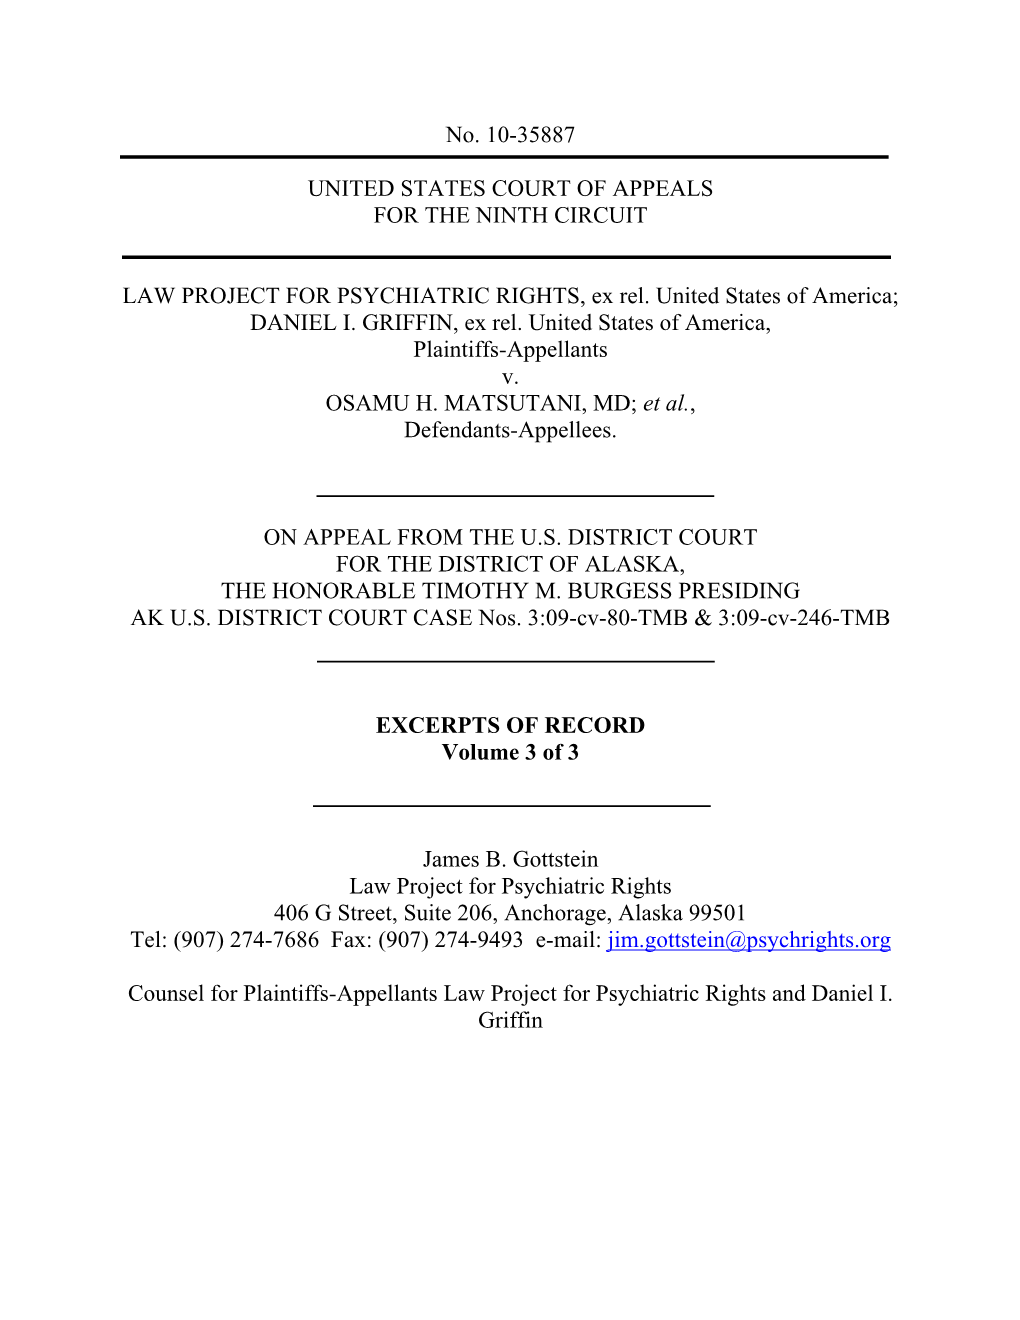 No. 10-35887 UNITED STATES COURT of APPEALS for THE